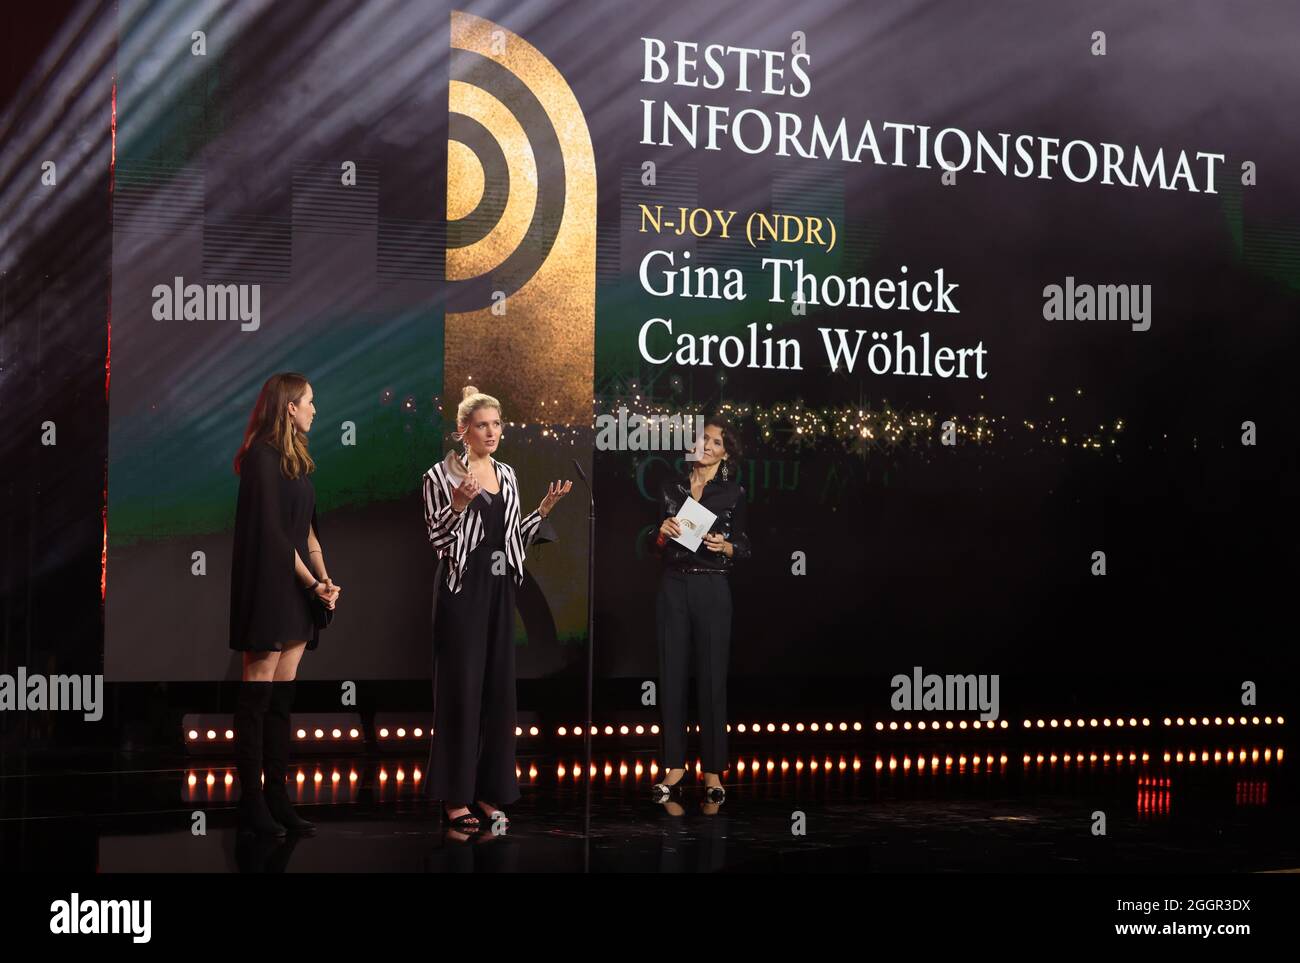 Hamburg, Germany. 02nd Sep, 2021. Antonia Rados (r) is on stage as laudator  during the German Radio Awards ceremony and presents the prize in the  category "Best Information Format" to Gina Thoneick